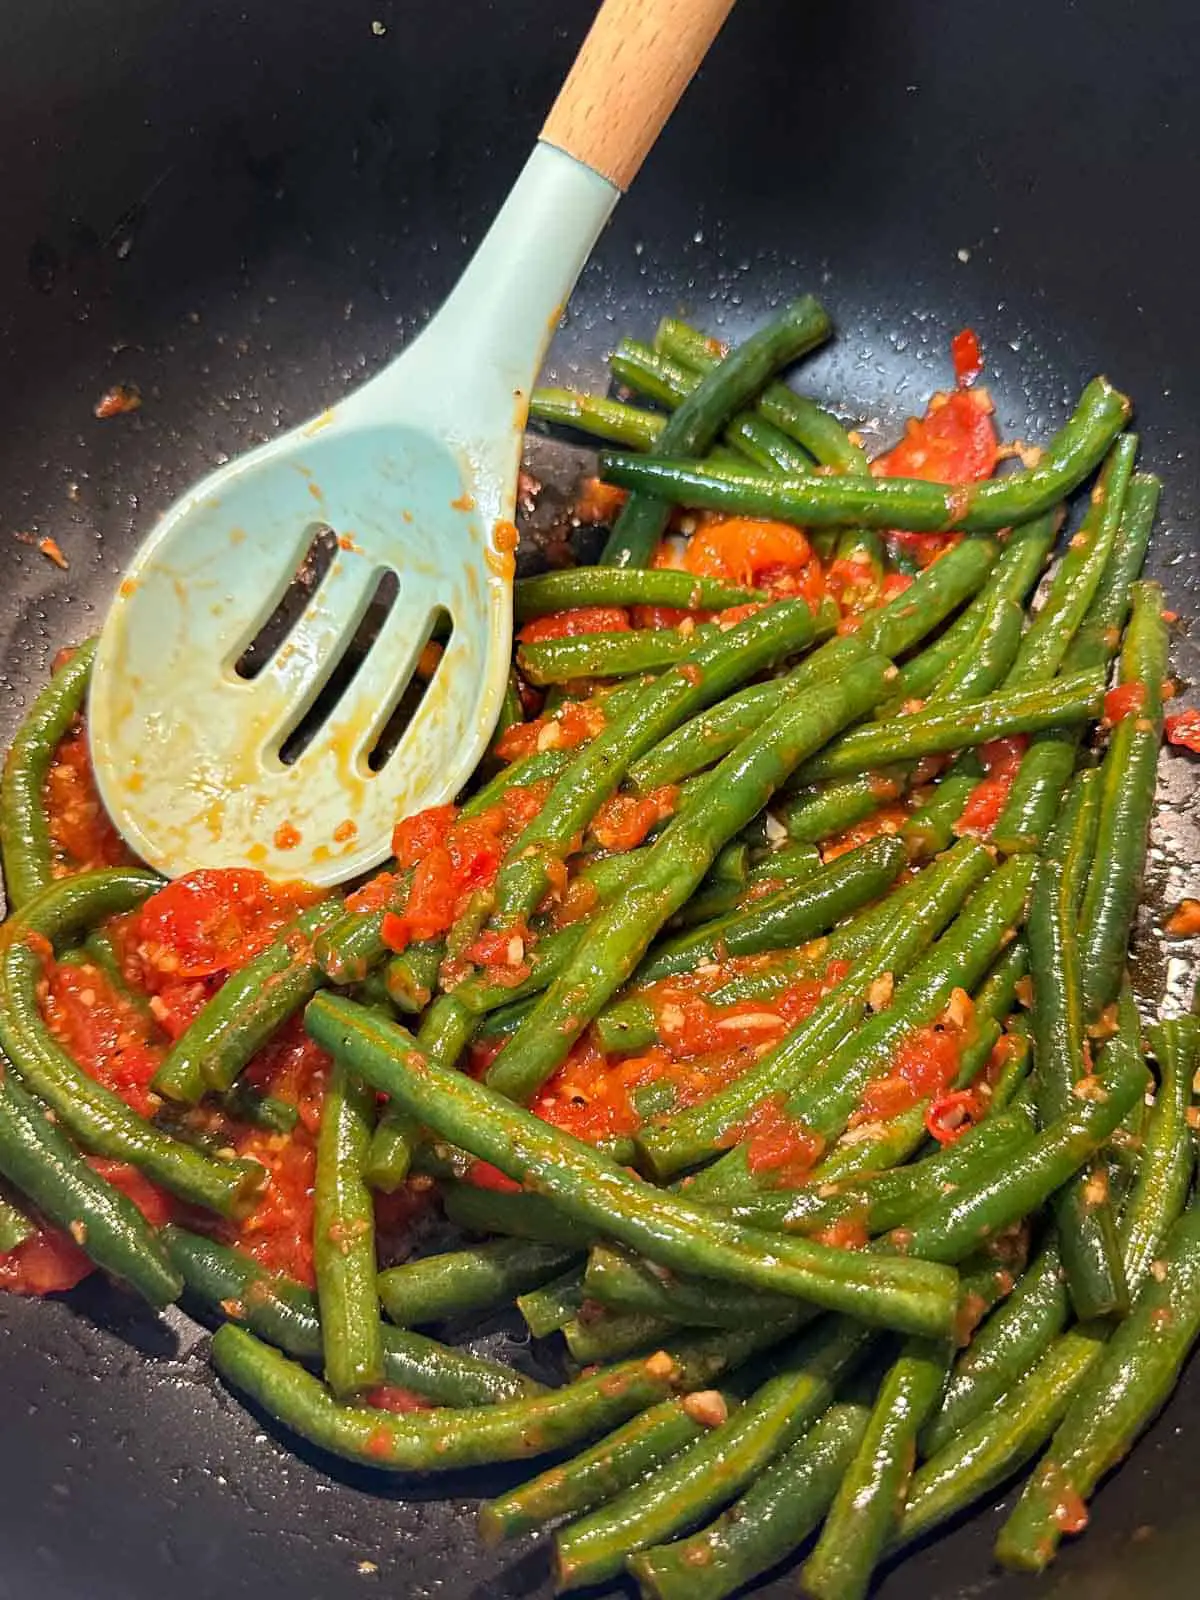 Green beans with tomatoes and garlic in a large pot. There is a blue slotted spoon with a wooden handle in the pot.